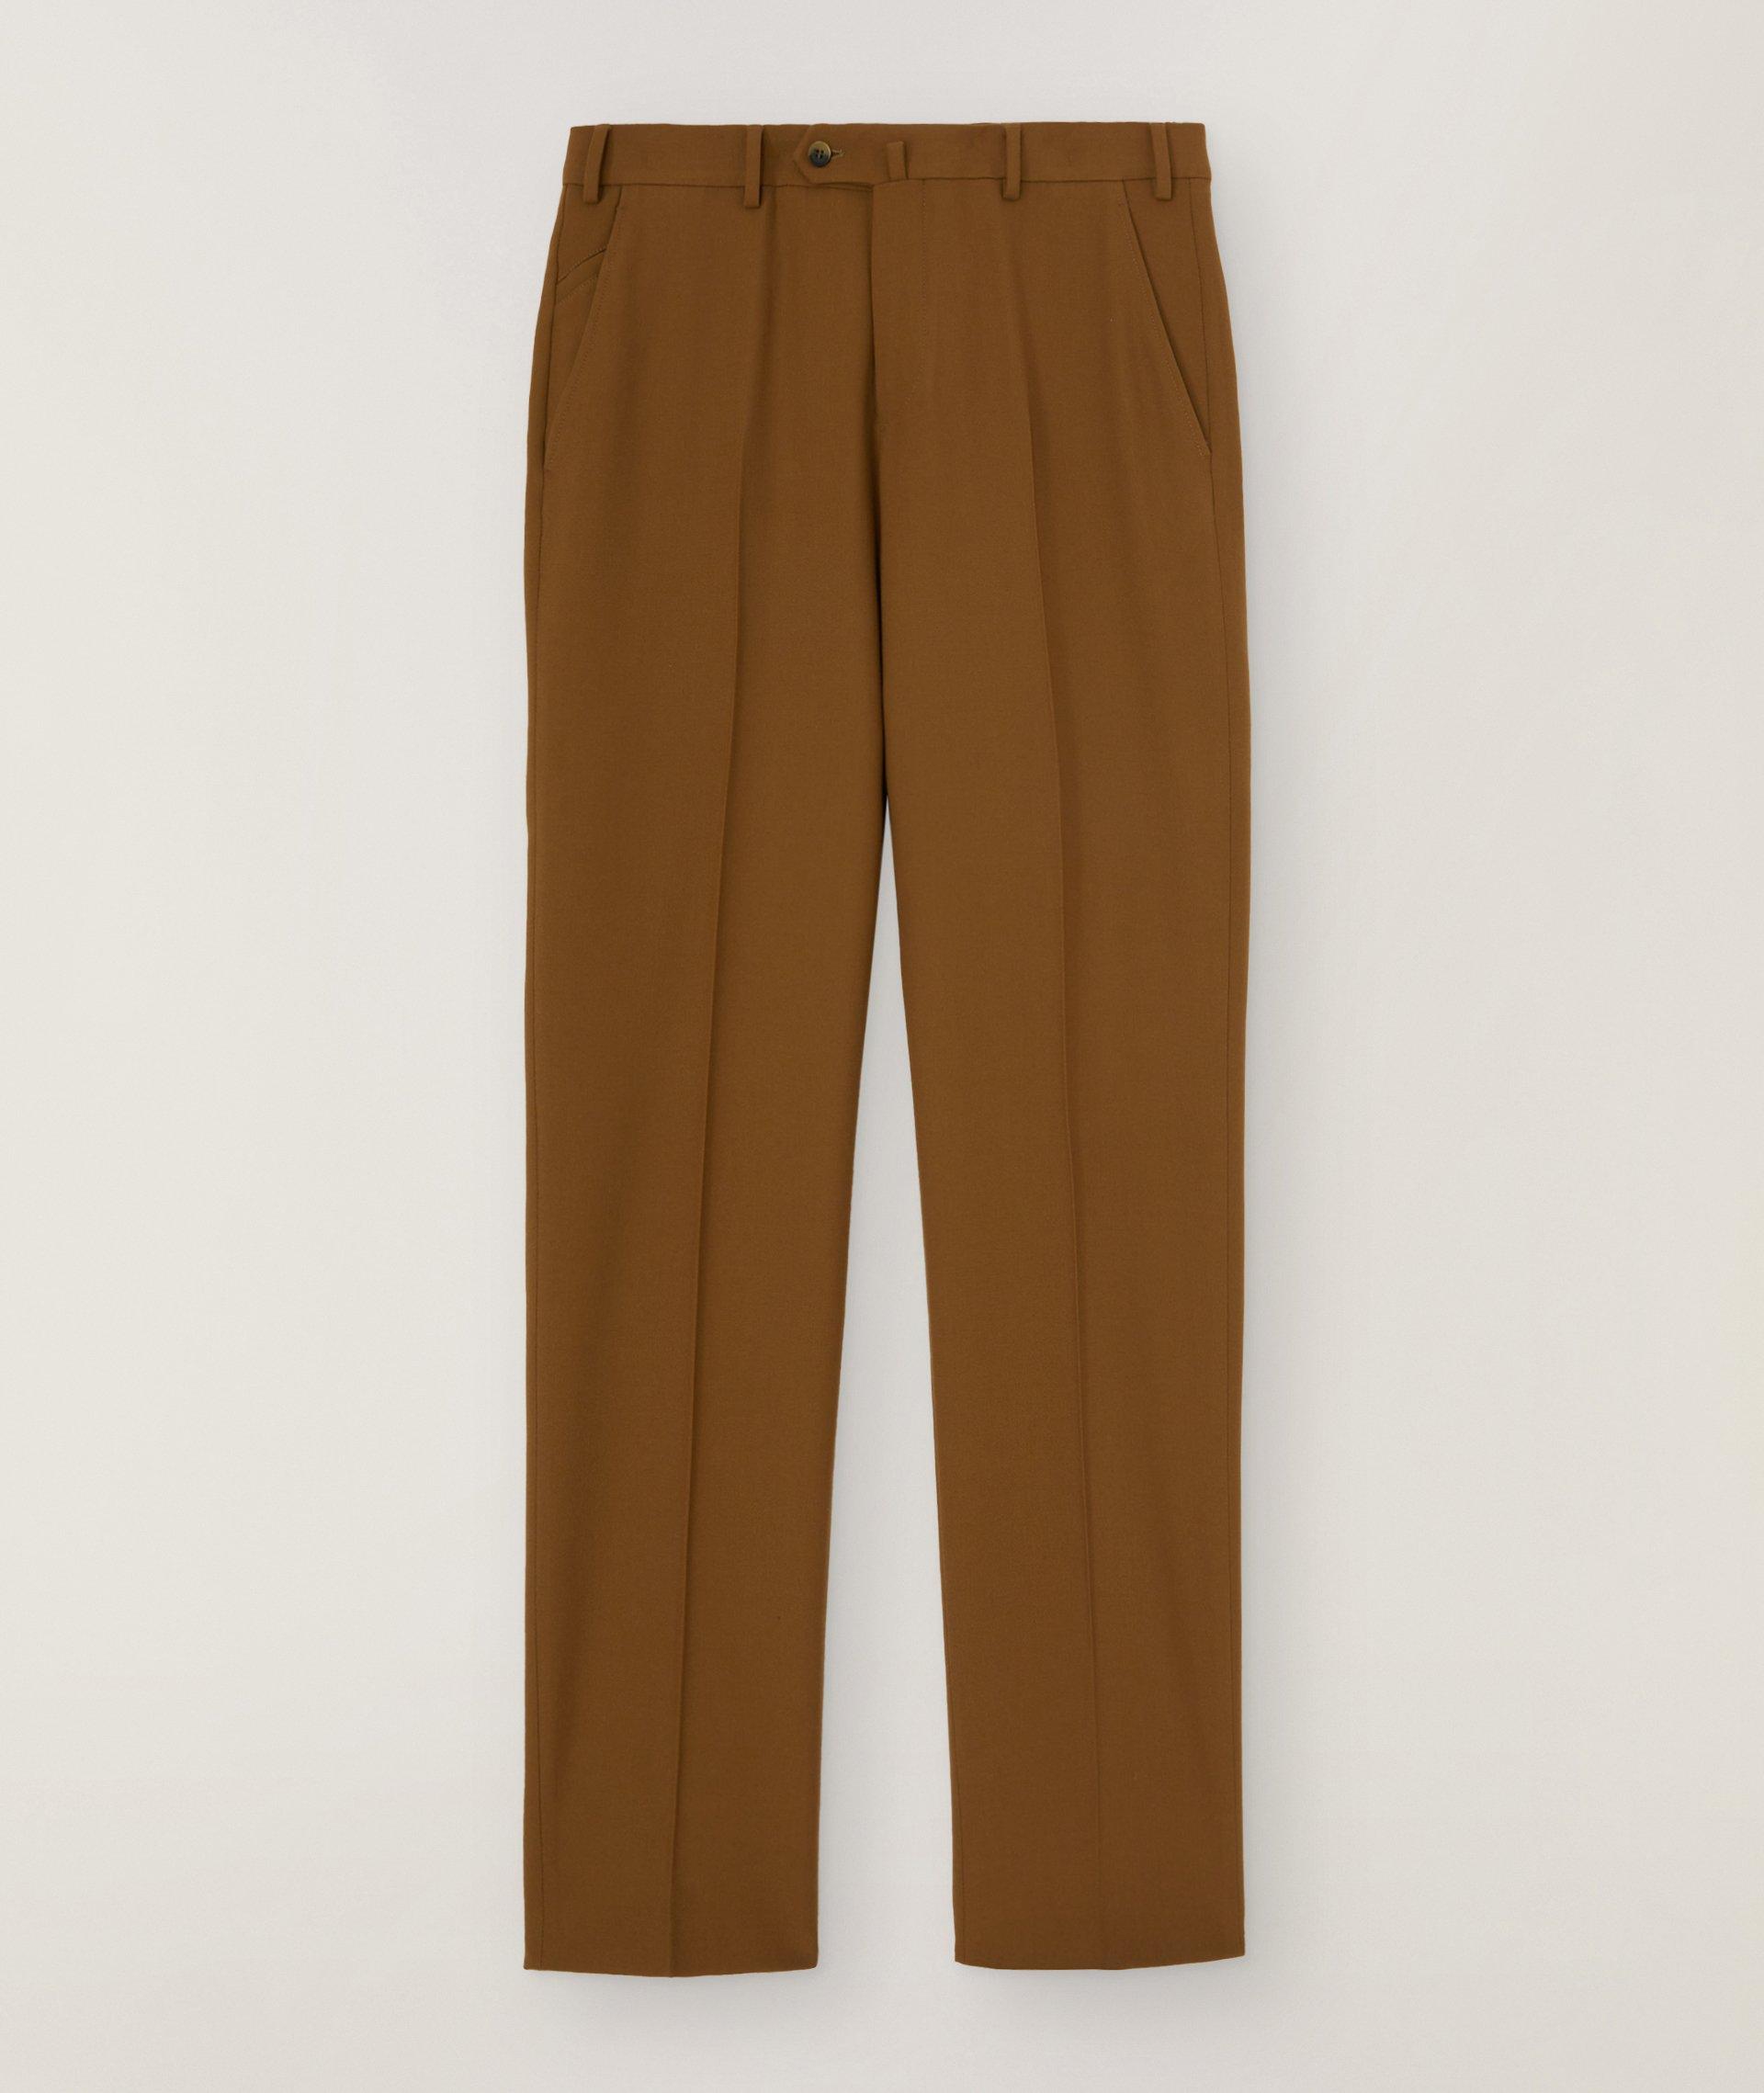 Four Pockets Twisted Wool Trouser image 0